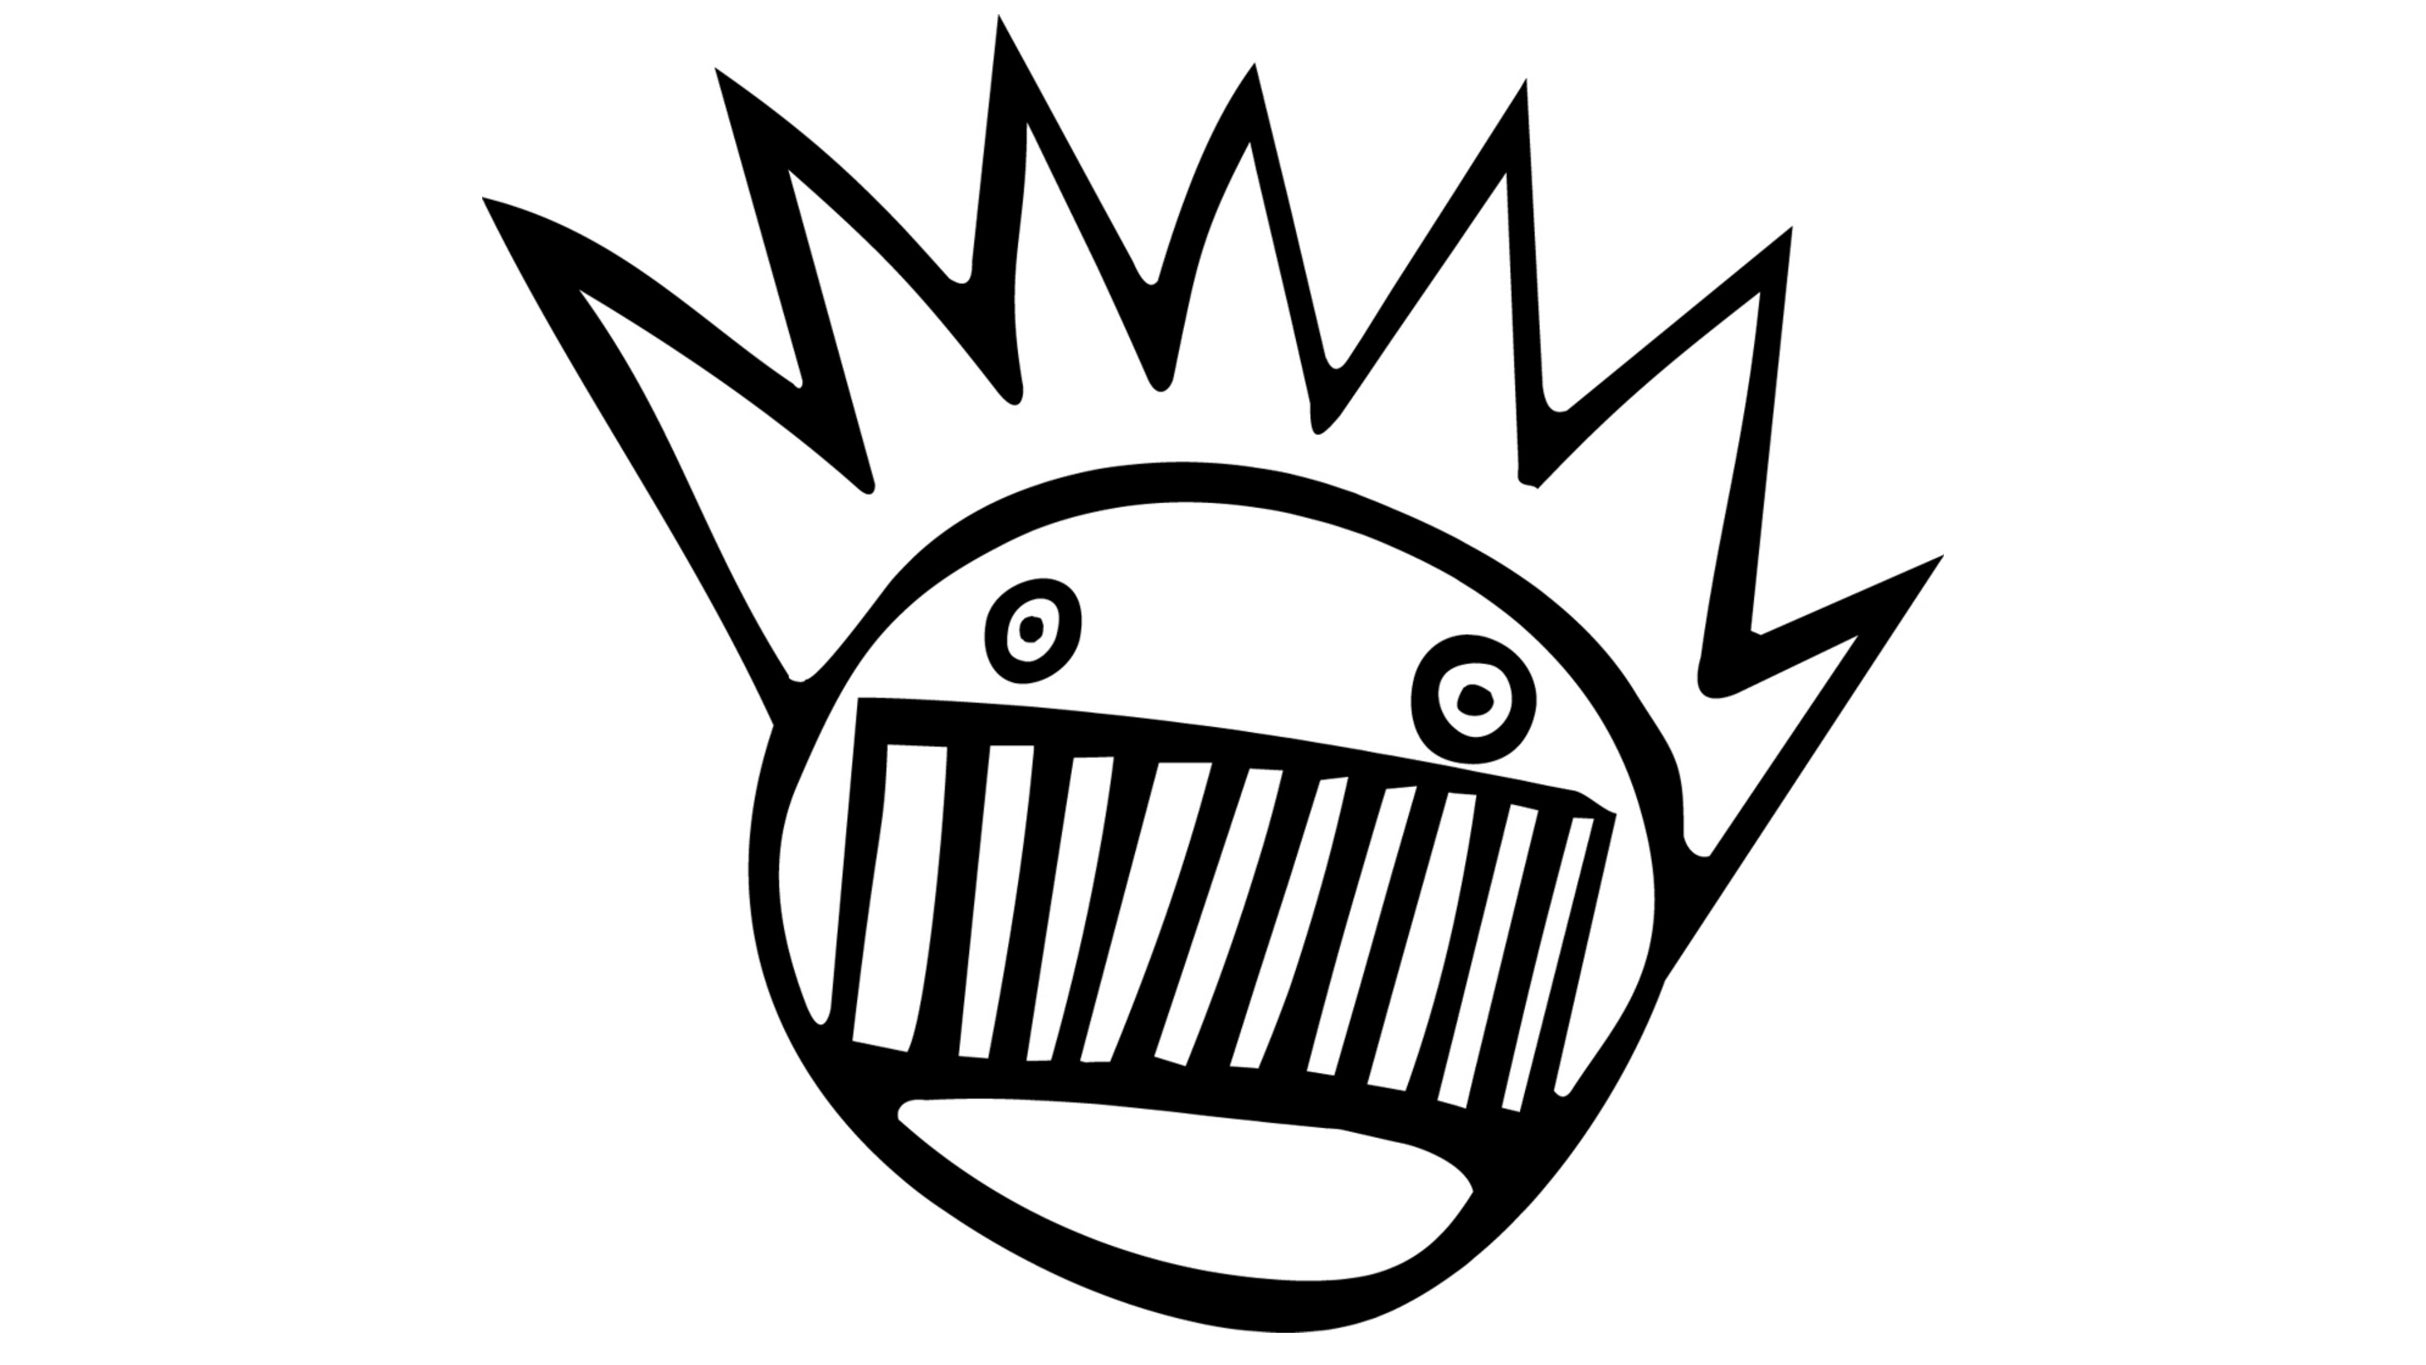 working presale password for An Evening With Ween advanced tickets in Seattle